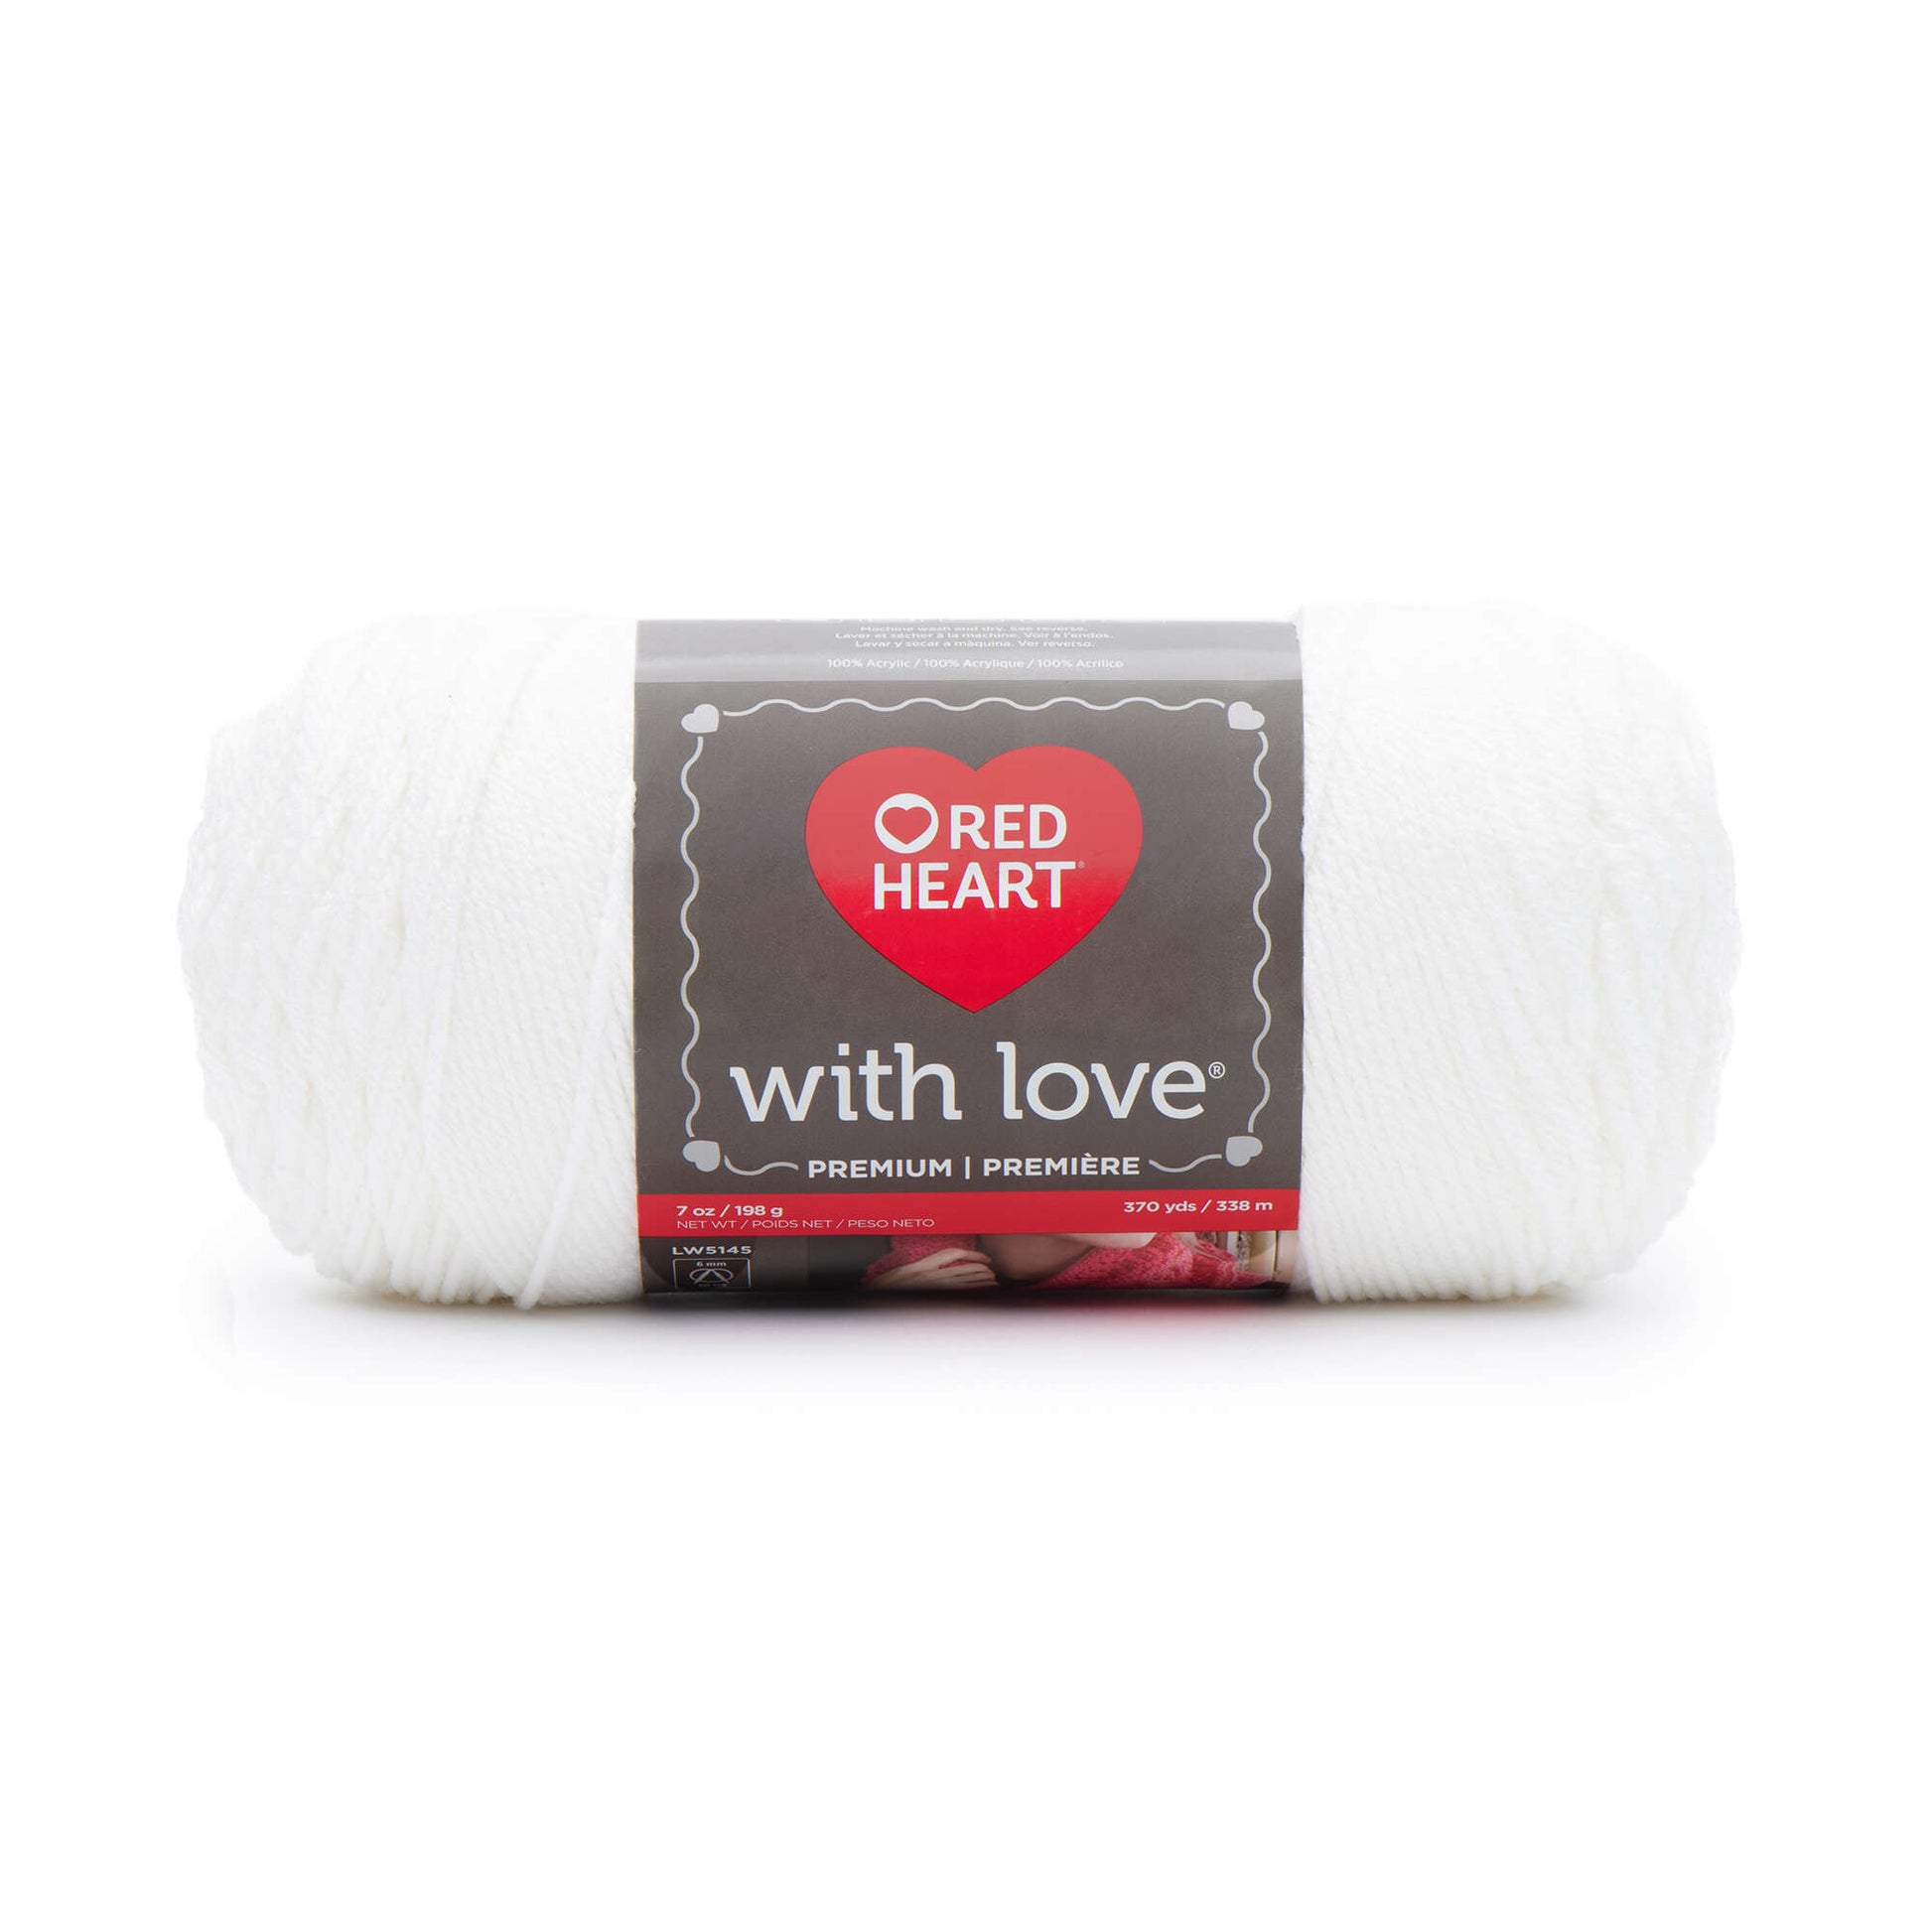 Red Heart With Love Yarn-Blue Hawaii-#4 Worsted 7 oz 370 yds Made